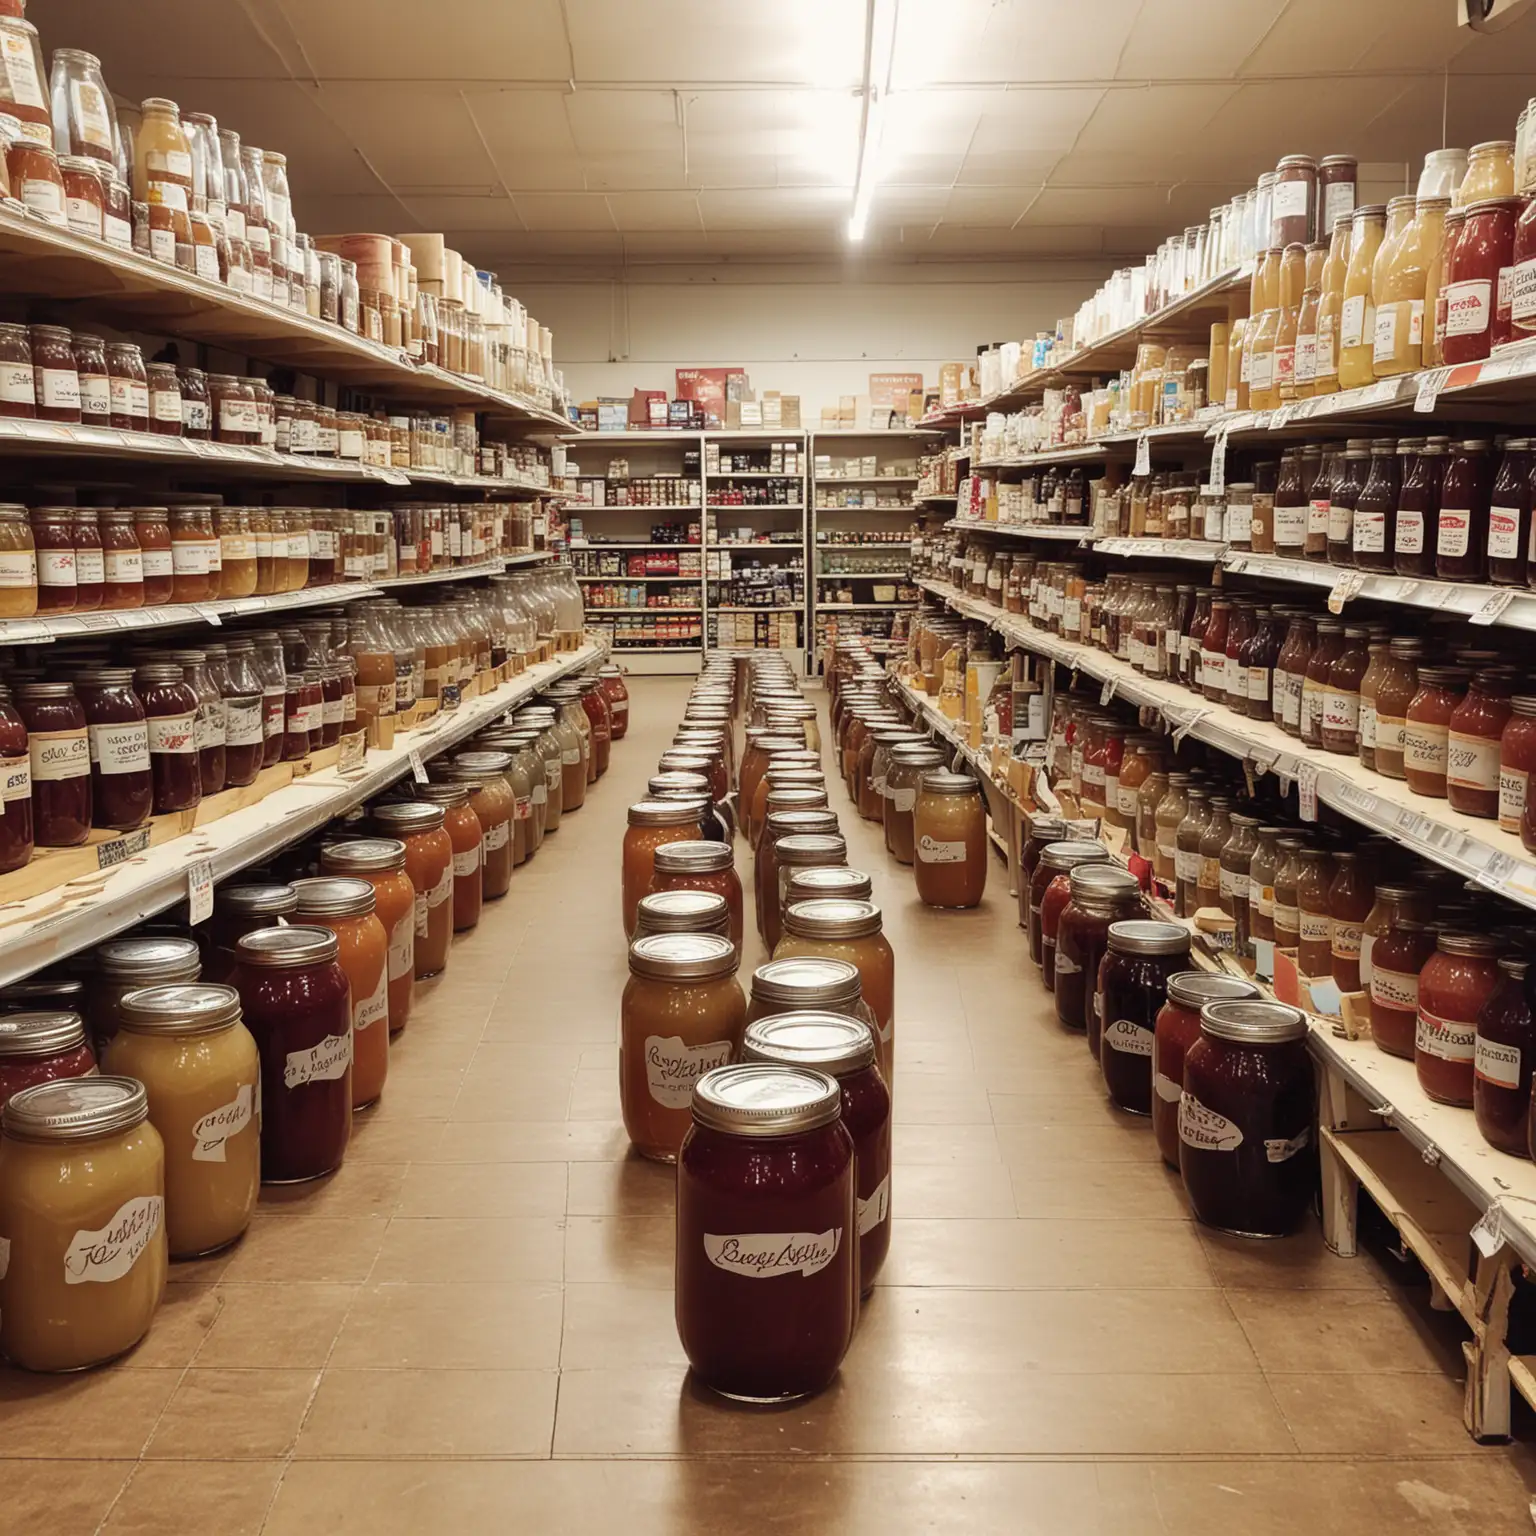 Jam jars having a dance party in a grocery store